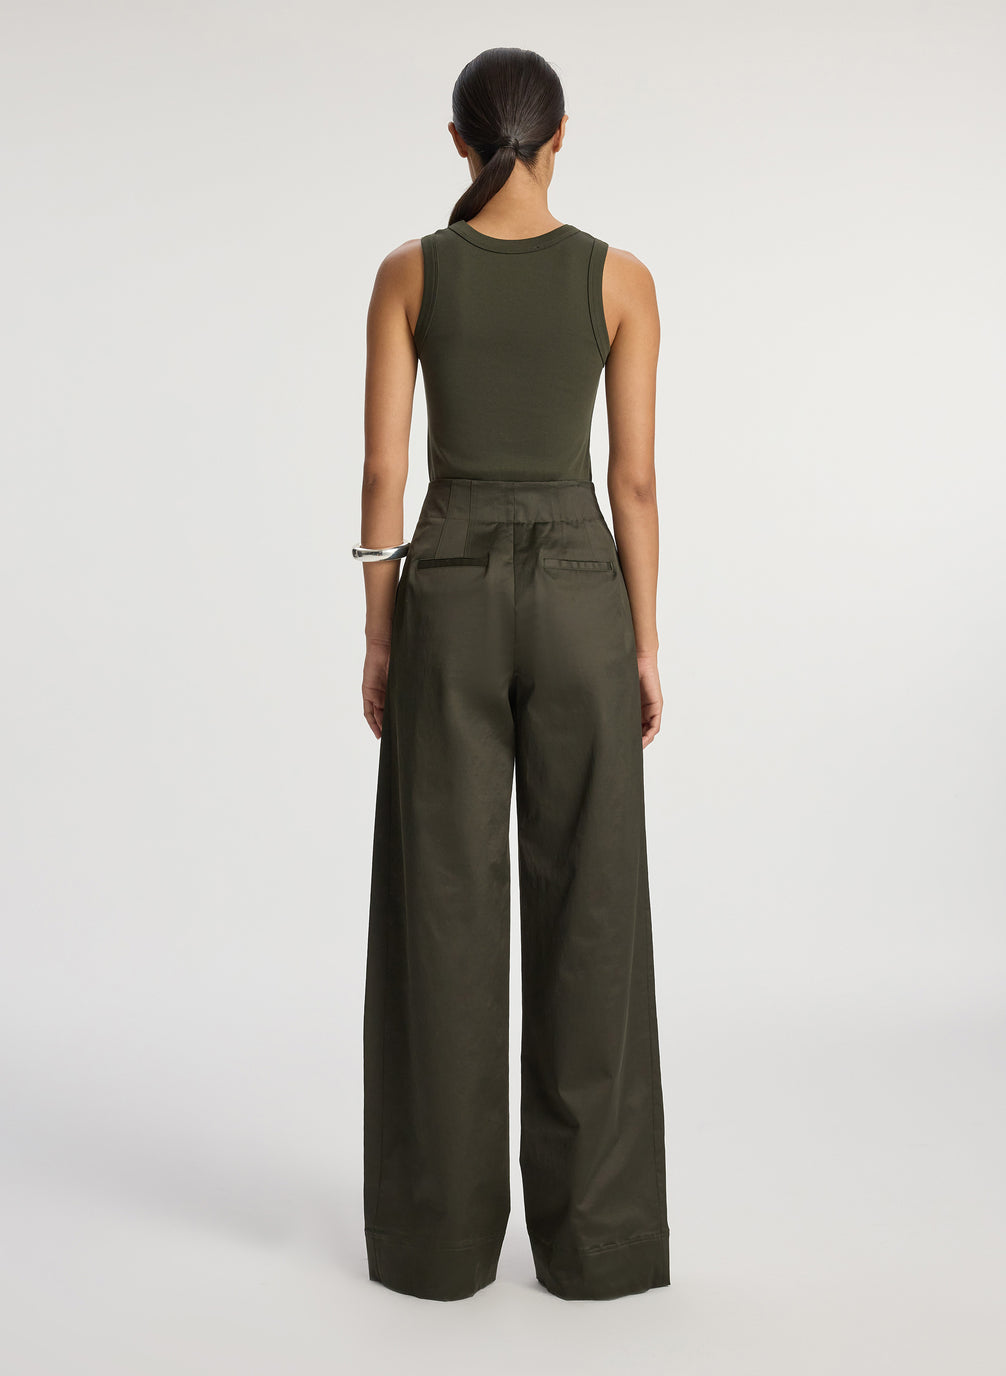 back view of woman wearing olive green tank top and olive green wide leg sateen pants